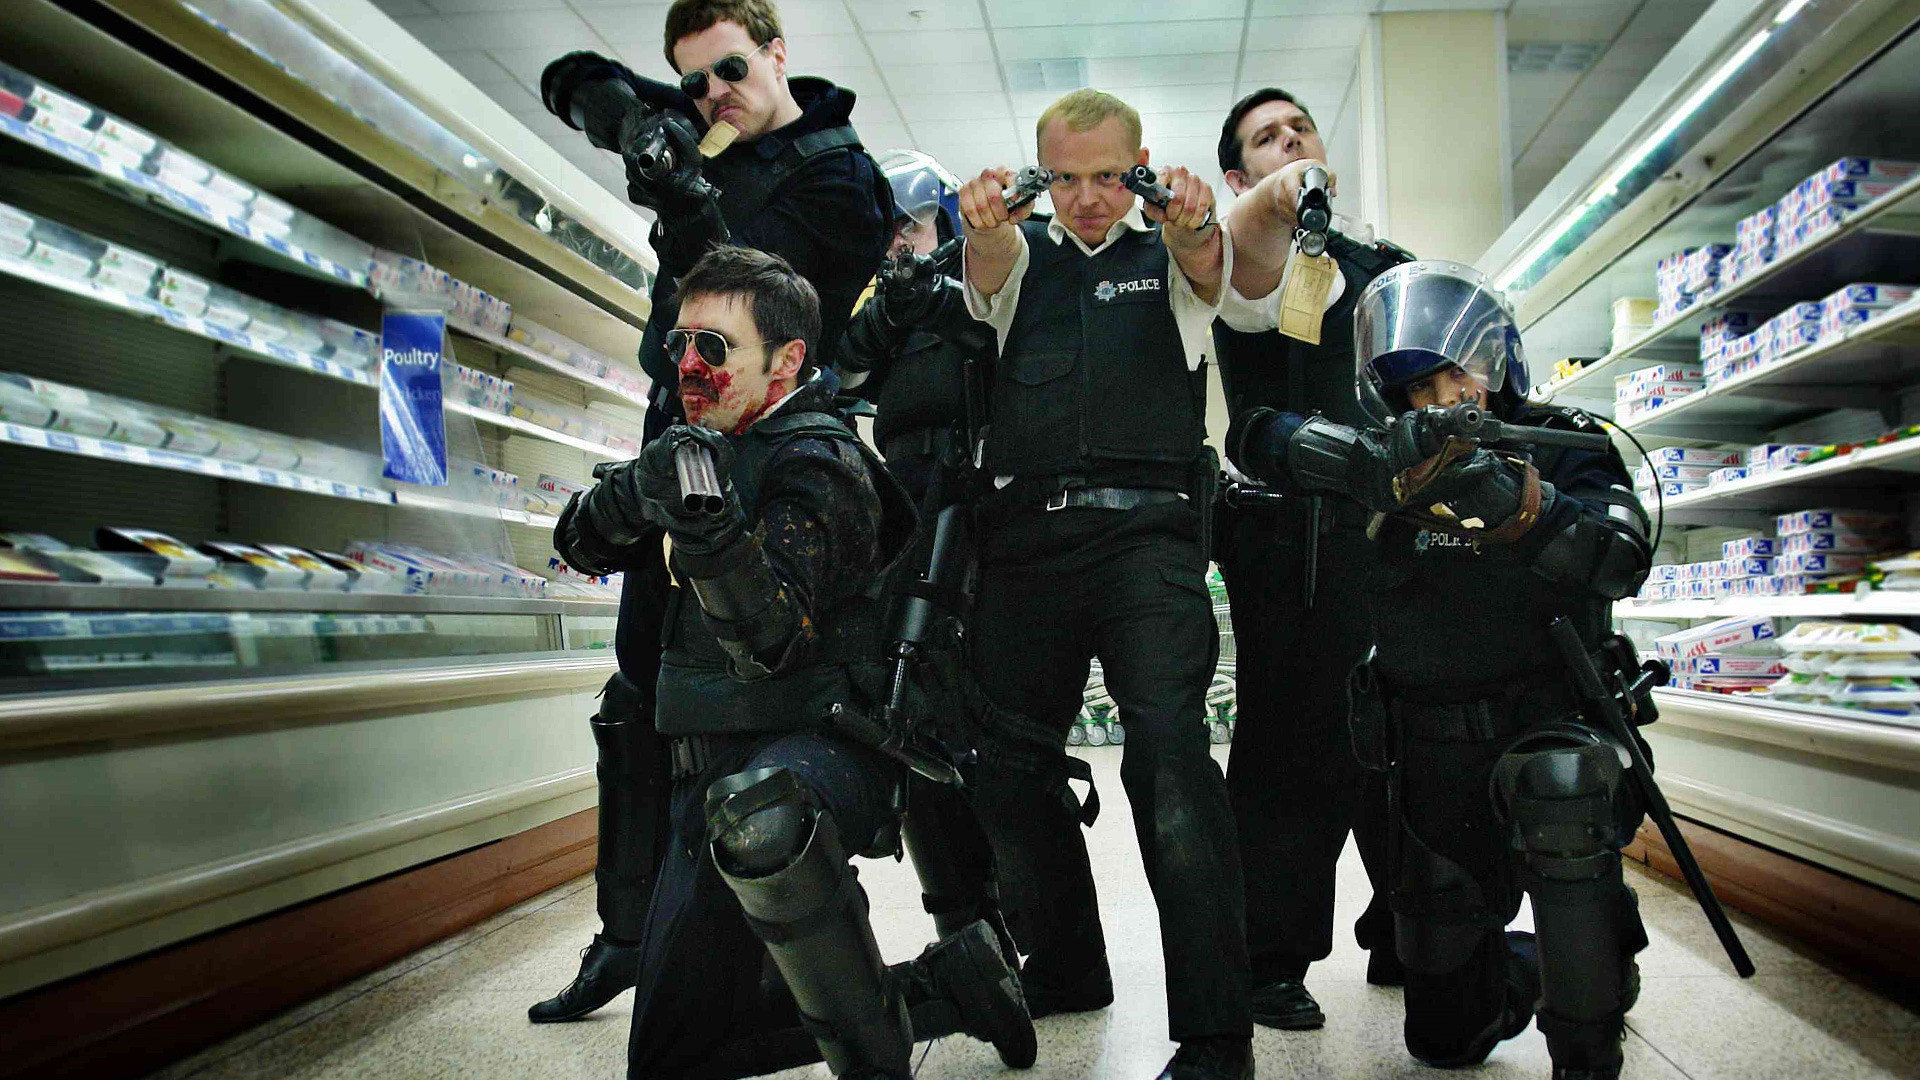 Hot Fuzz, HD background image, Dynamic visual style, Exciting police adventure, 1920x1080 Full HD Desktop